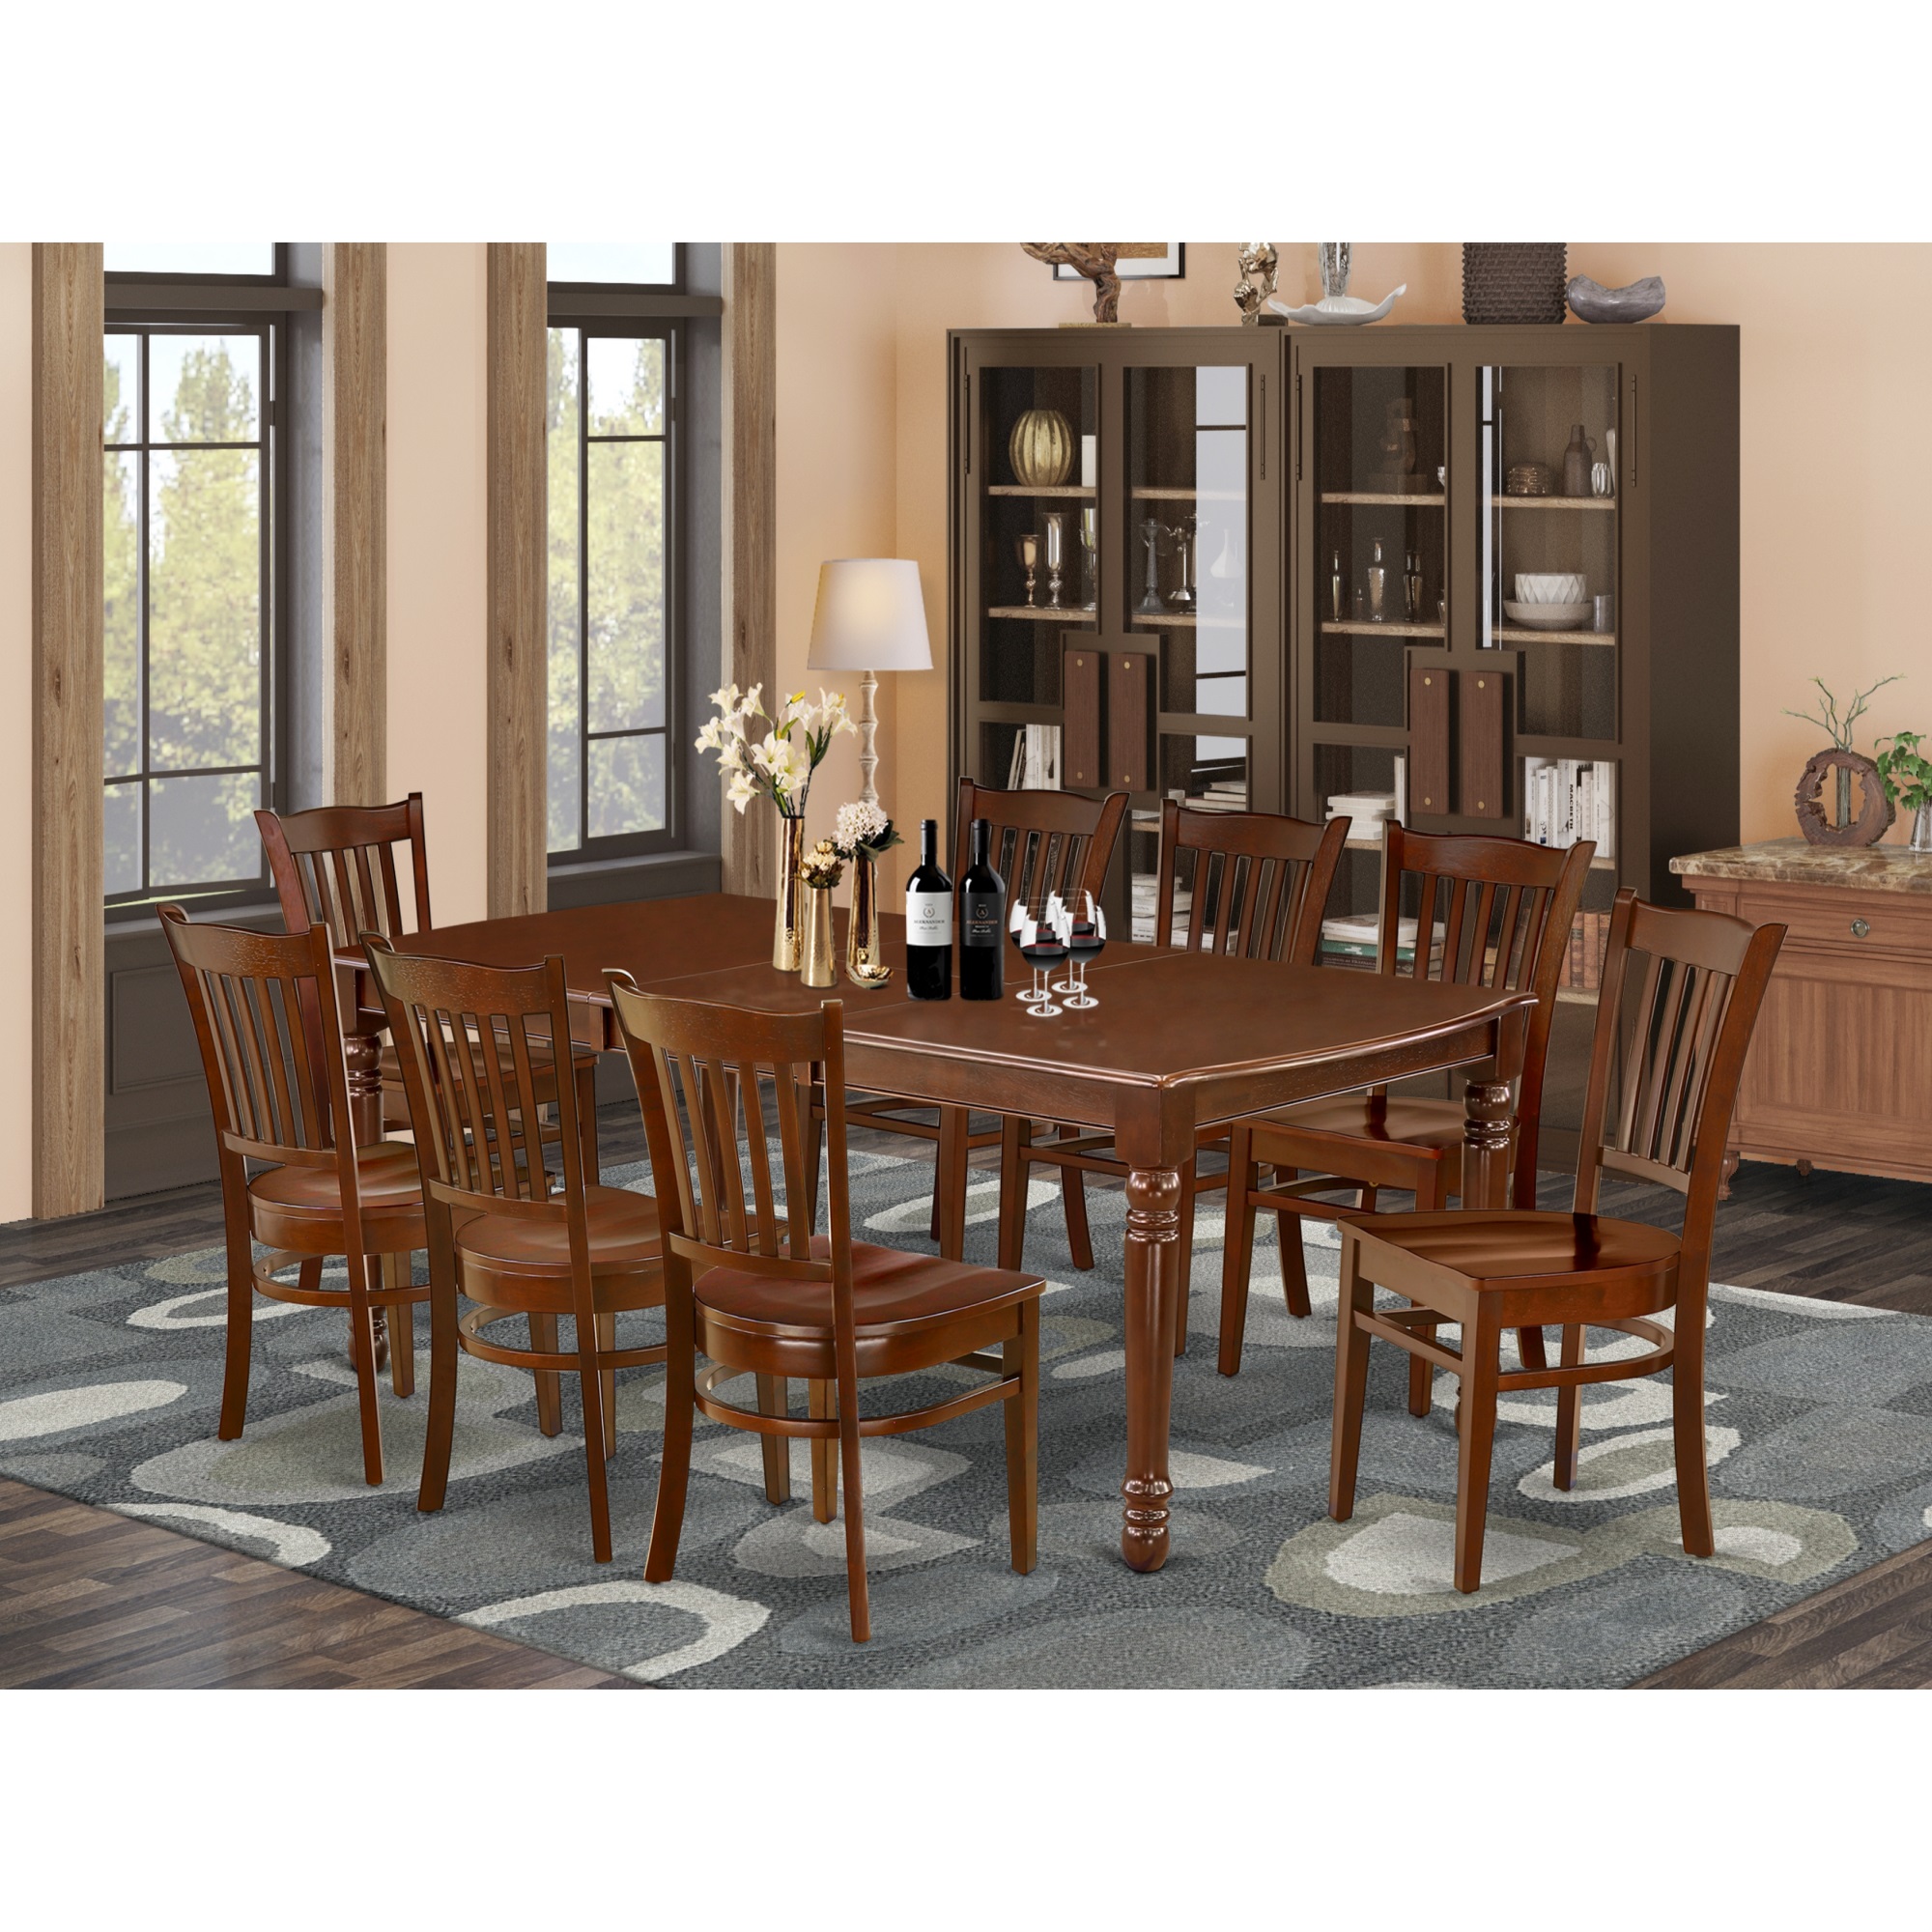 East West Furniture DOGR9-MAH-W 9Pc Rectangular 60/78" Dining Room Table With 18 In Butterfly Leaf And 8 Wood Seat Chairs